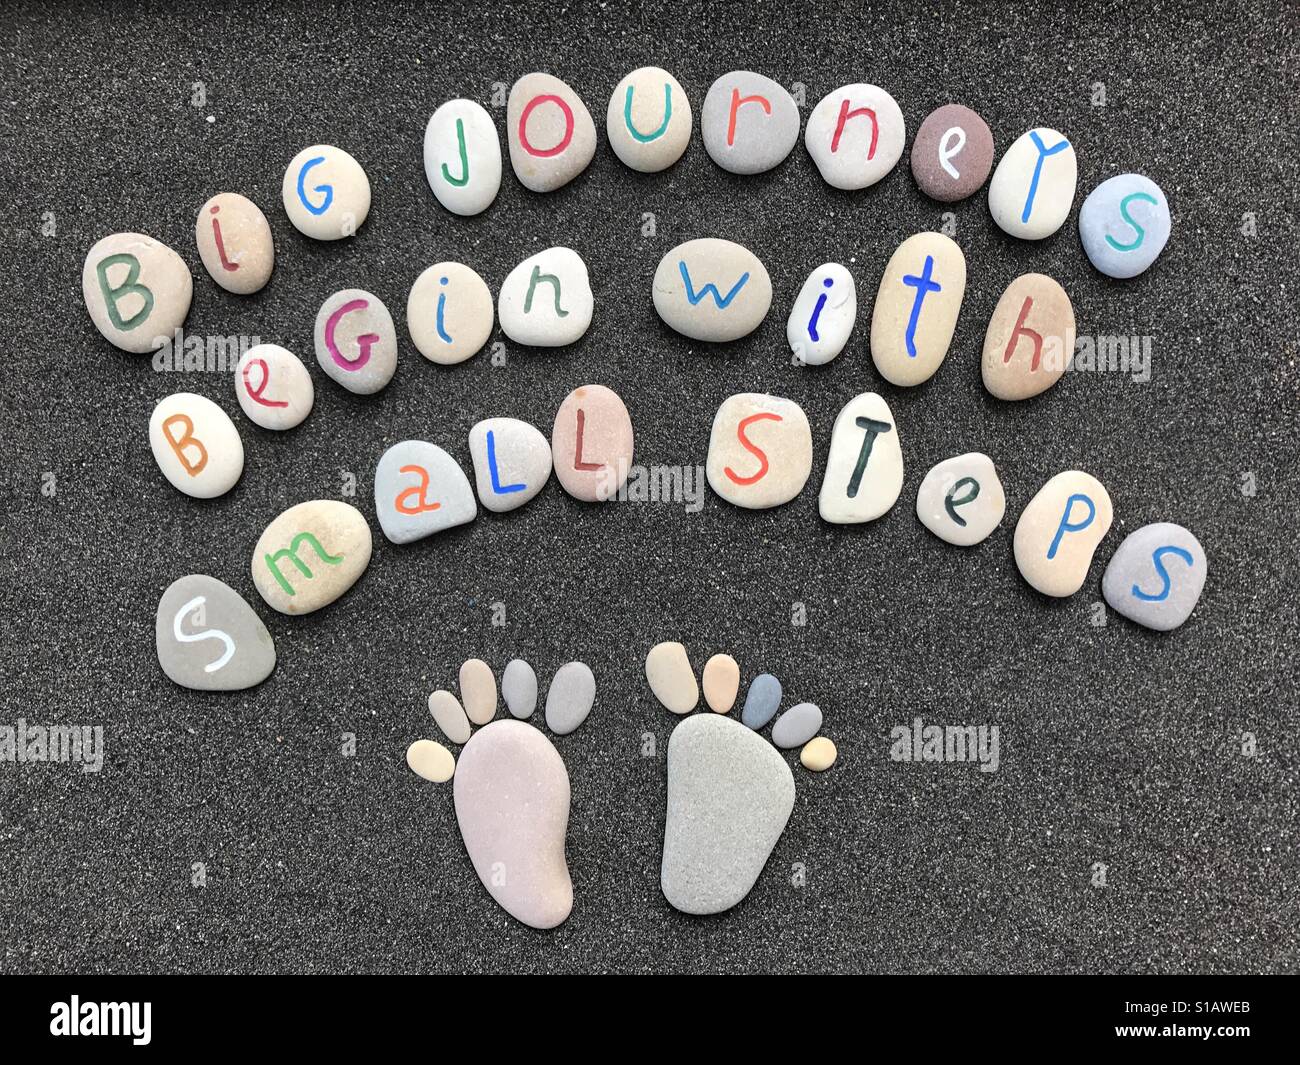 Big journeys begin with small steps, inspiration quote with stones Stock Photo